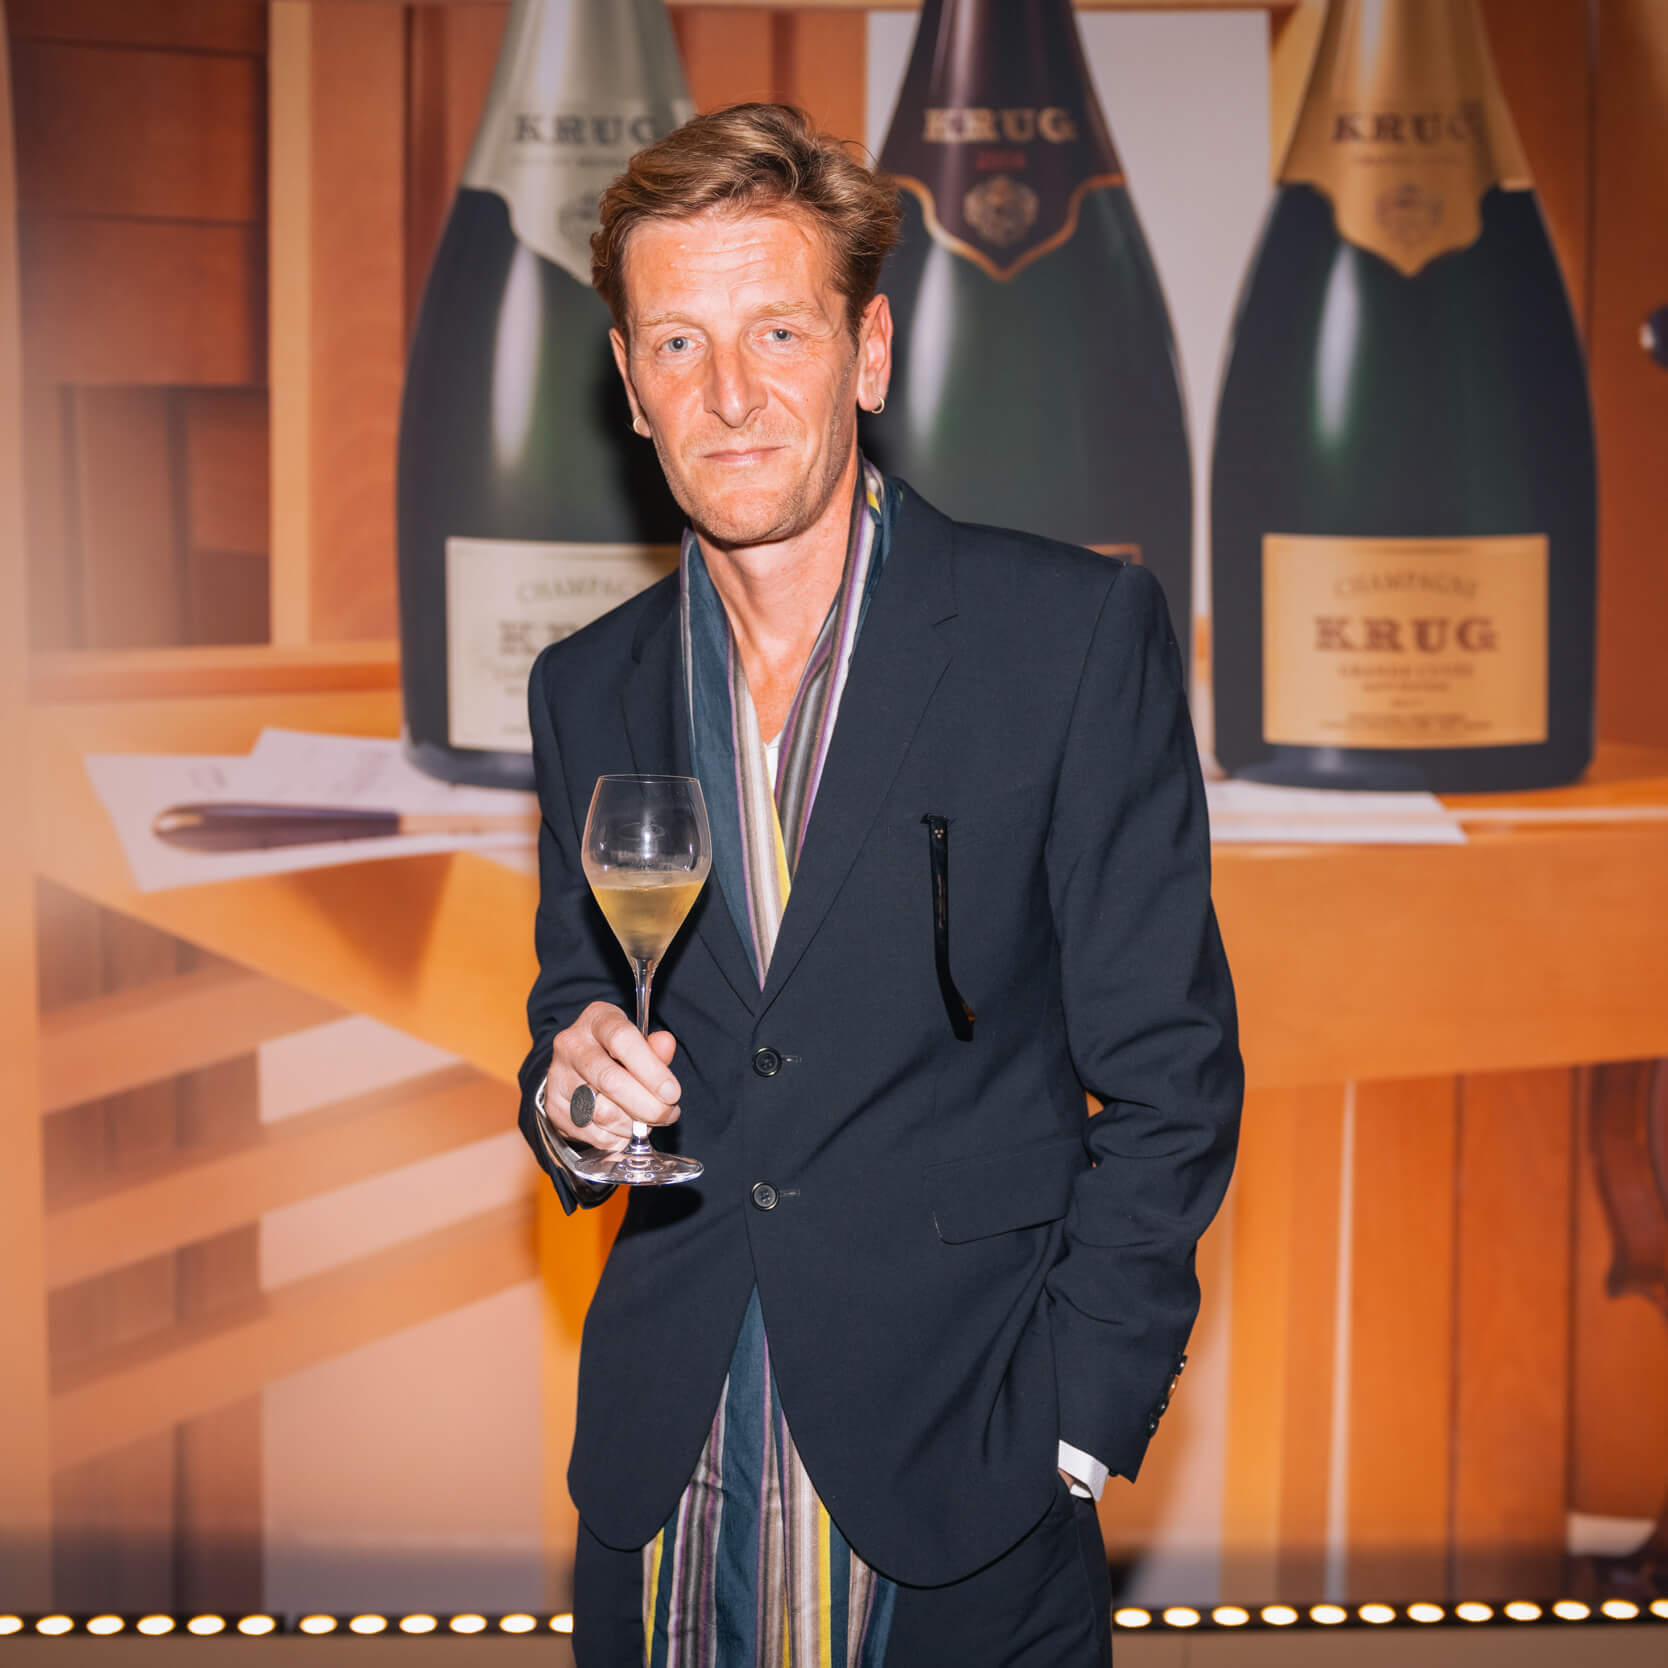 Seeing Sound, Hearing Krug event in London